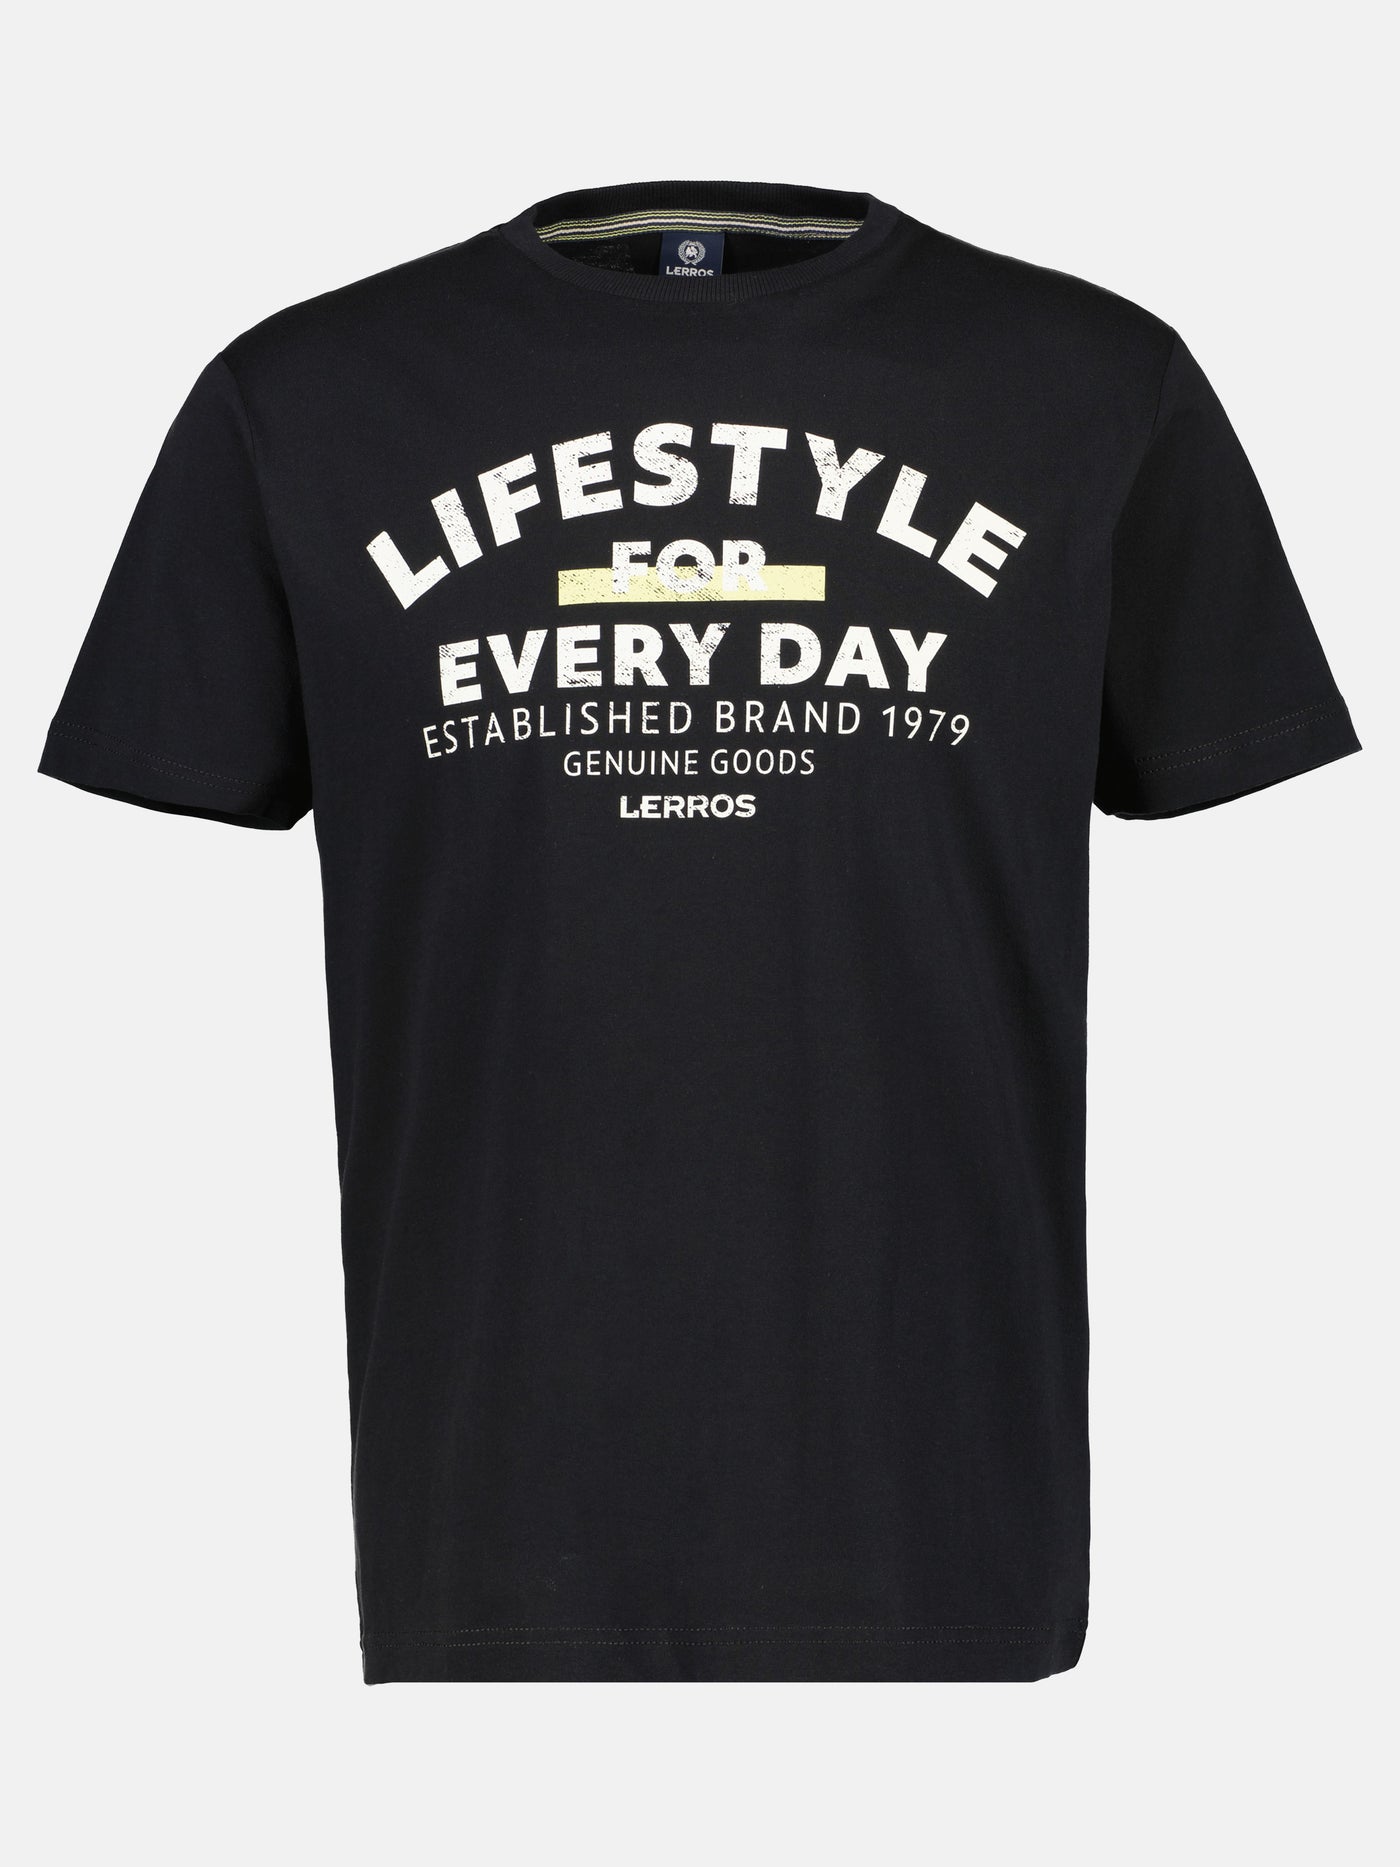 T-Shirt *Lifestyle for every day* LERROS SHOP –